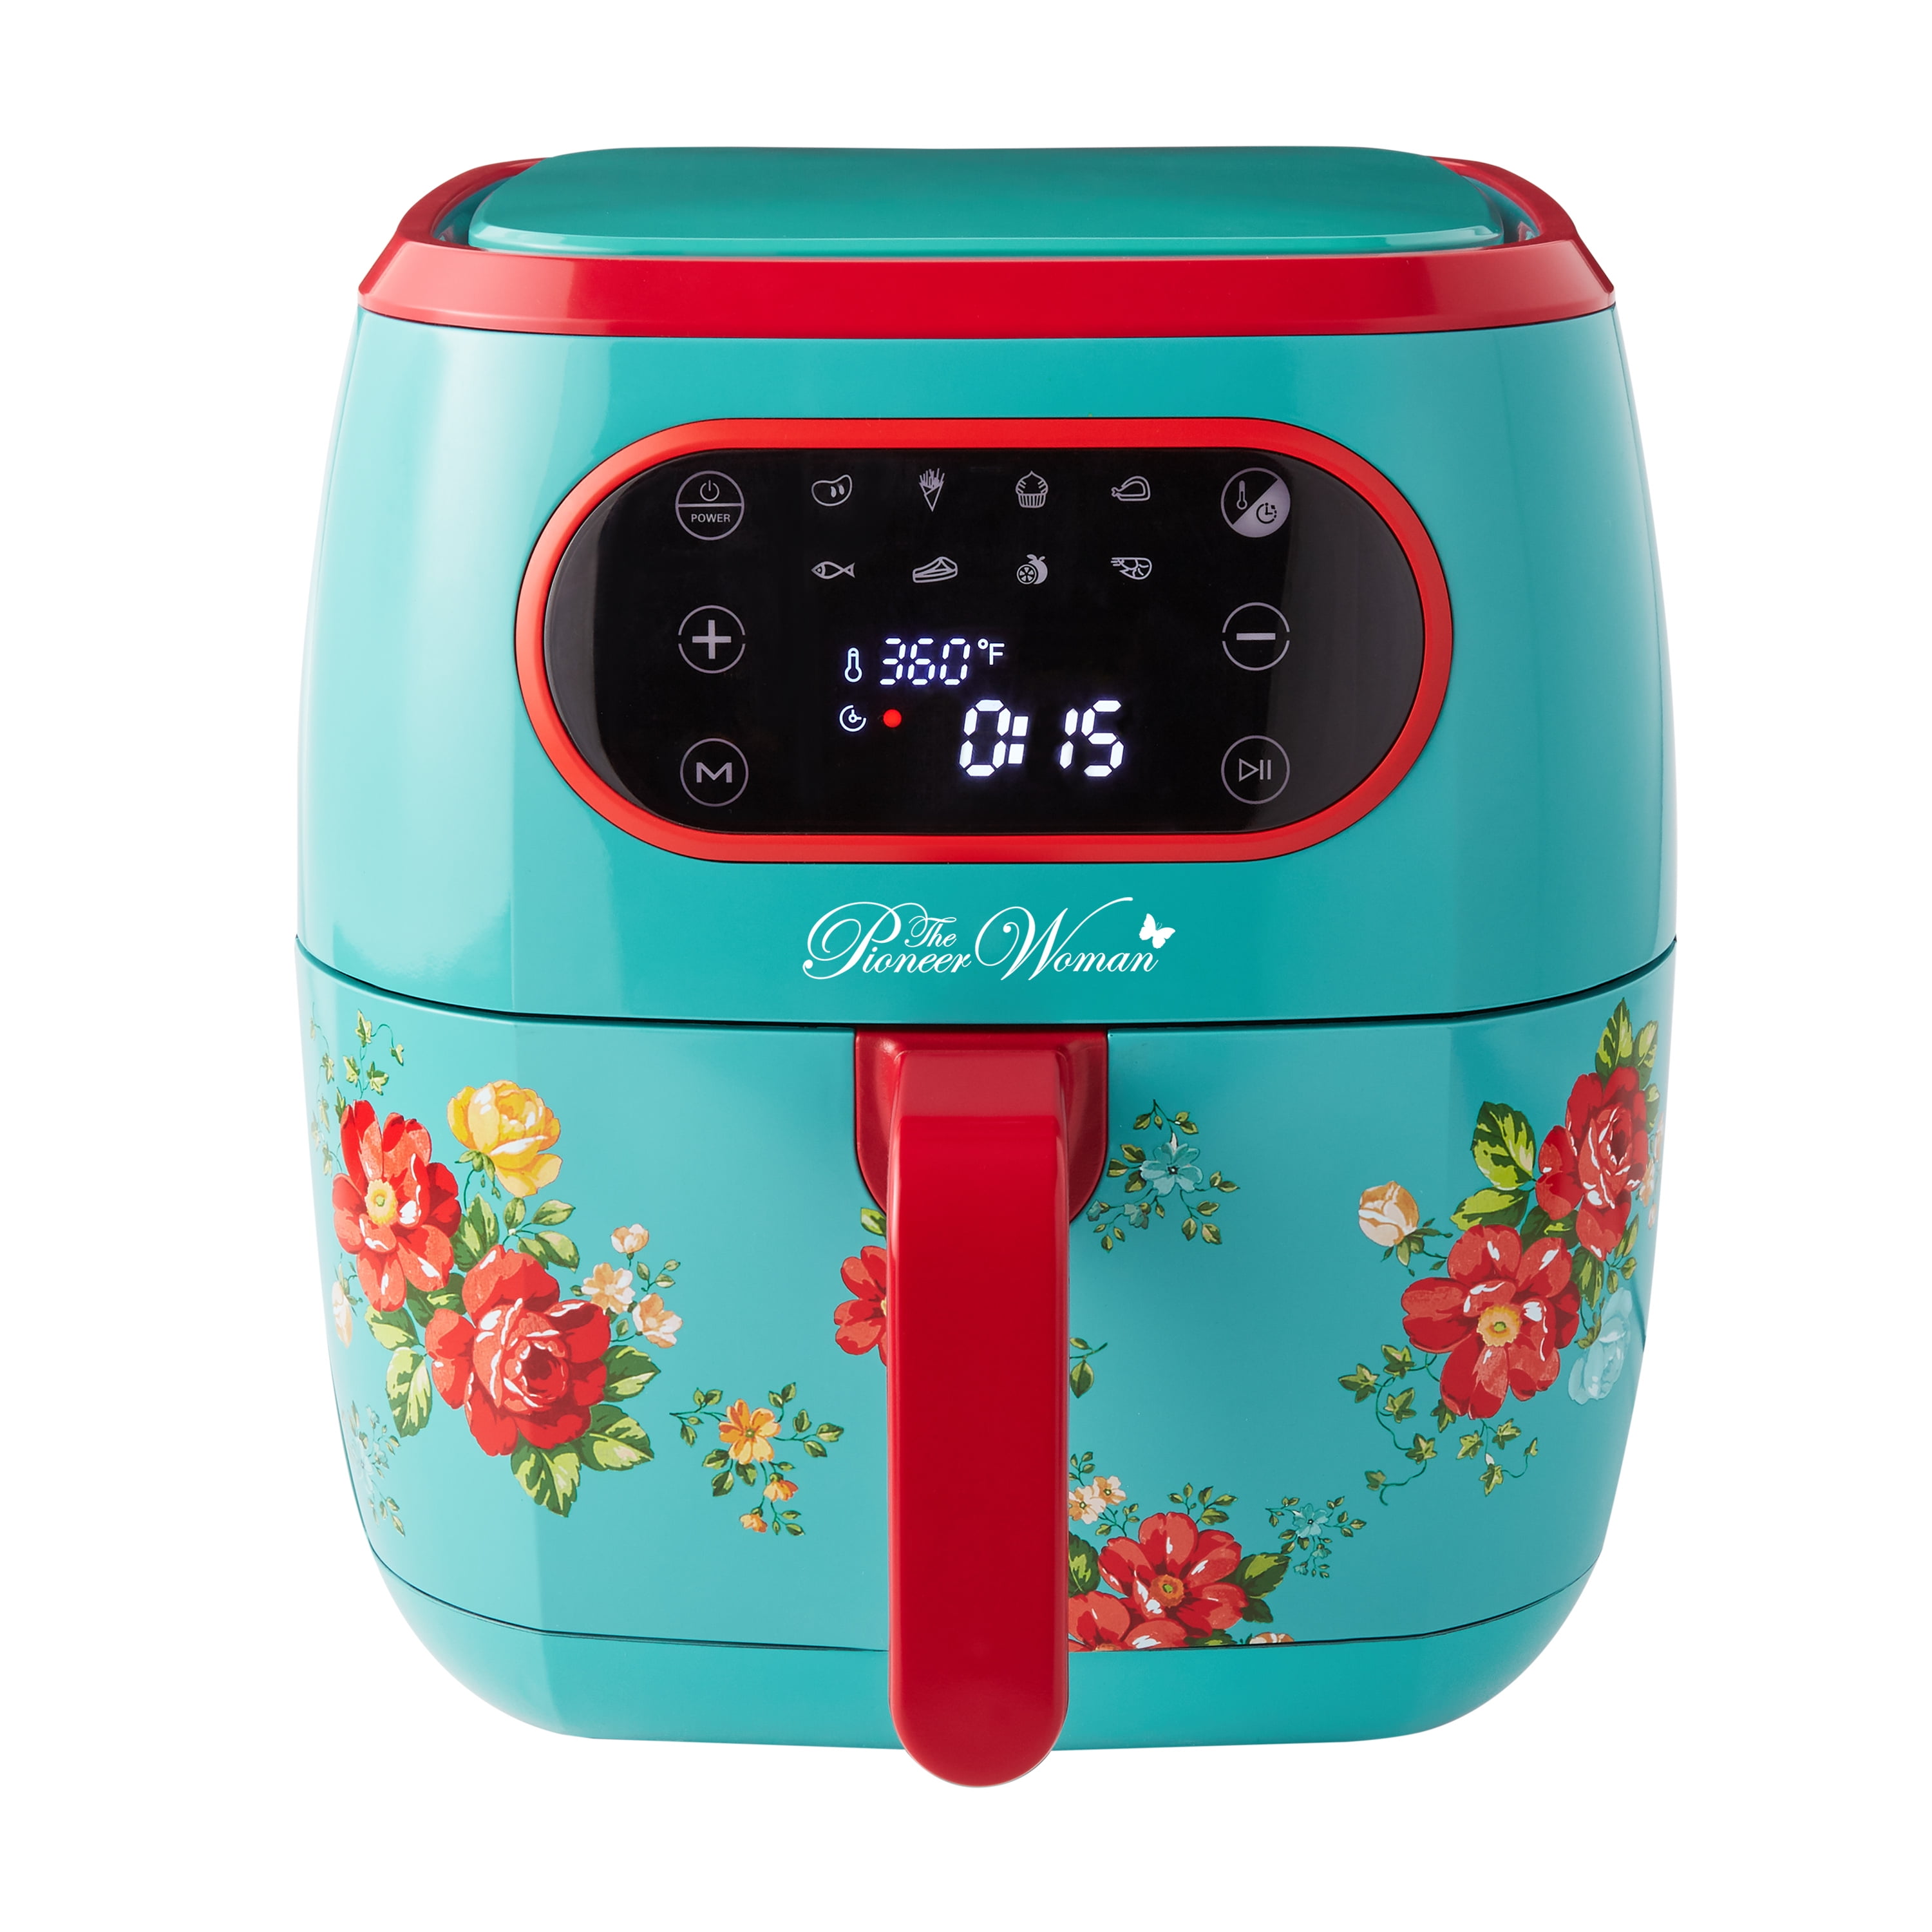 Vintage Floral 6-Quart Air Fryer with LED Screen and France